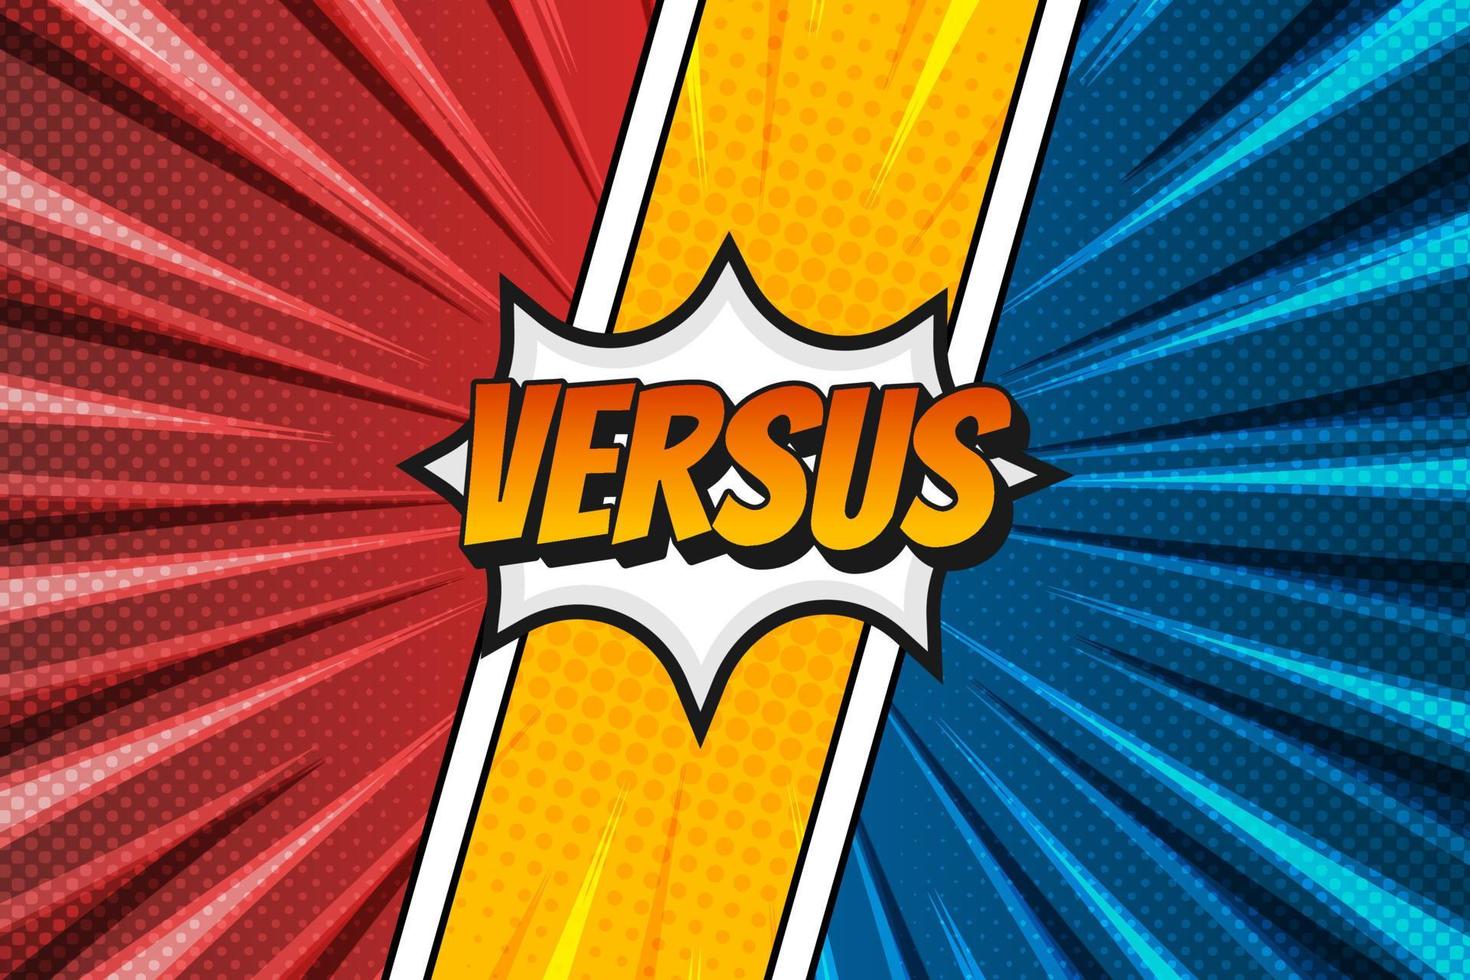 Duel comic book style versus background with rays vector